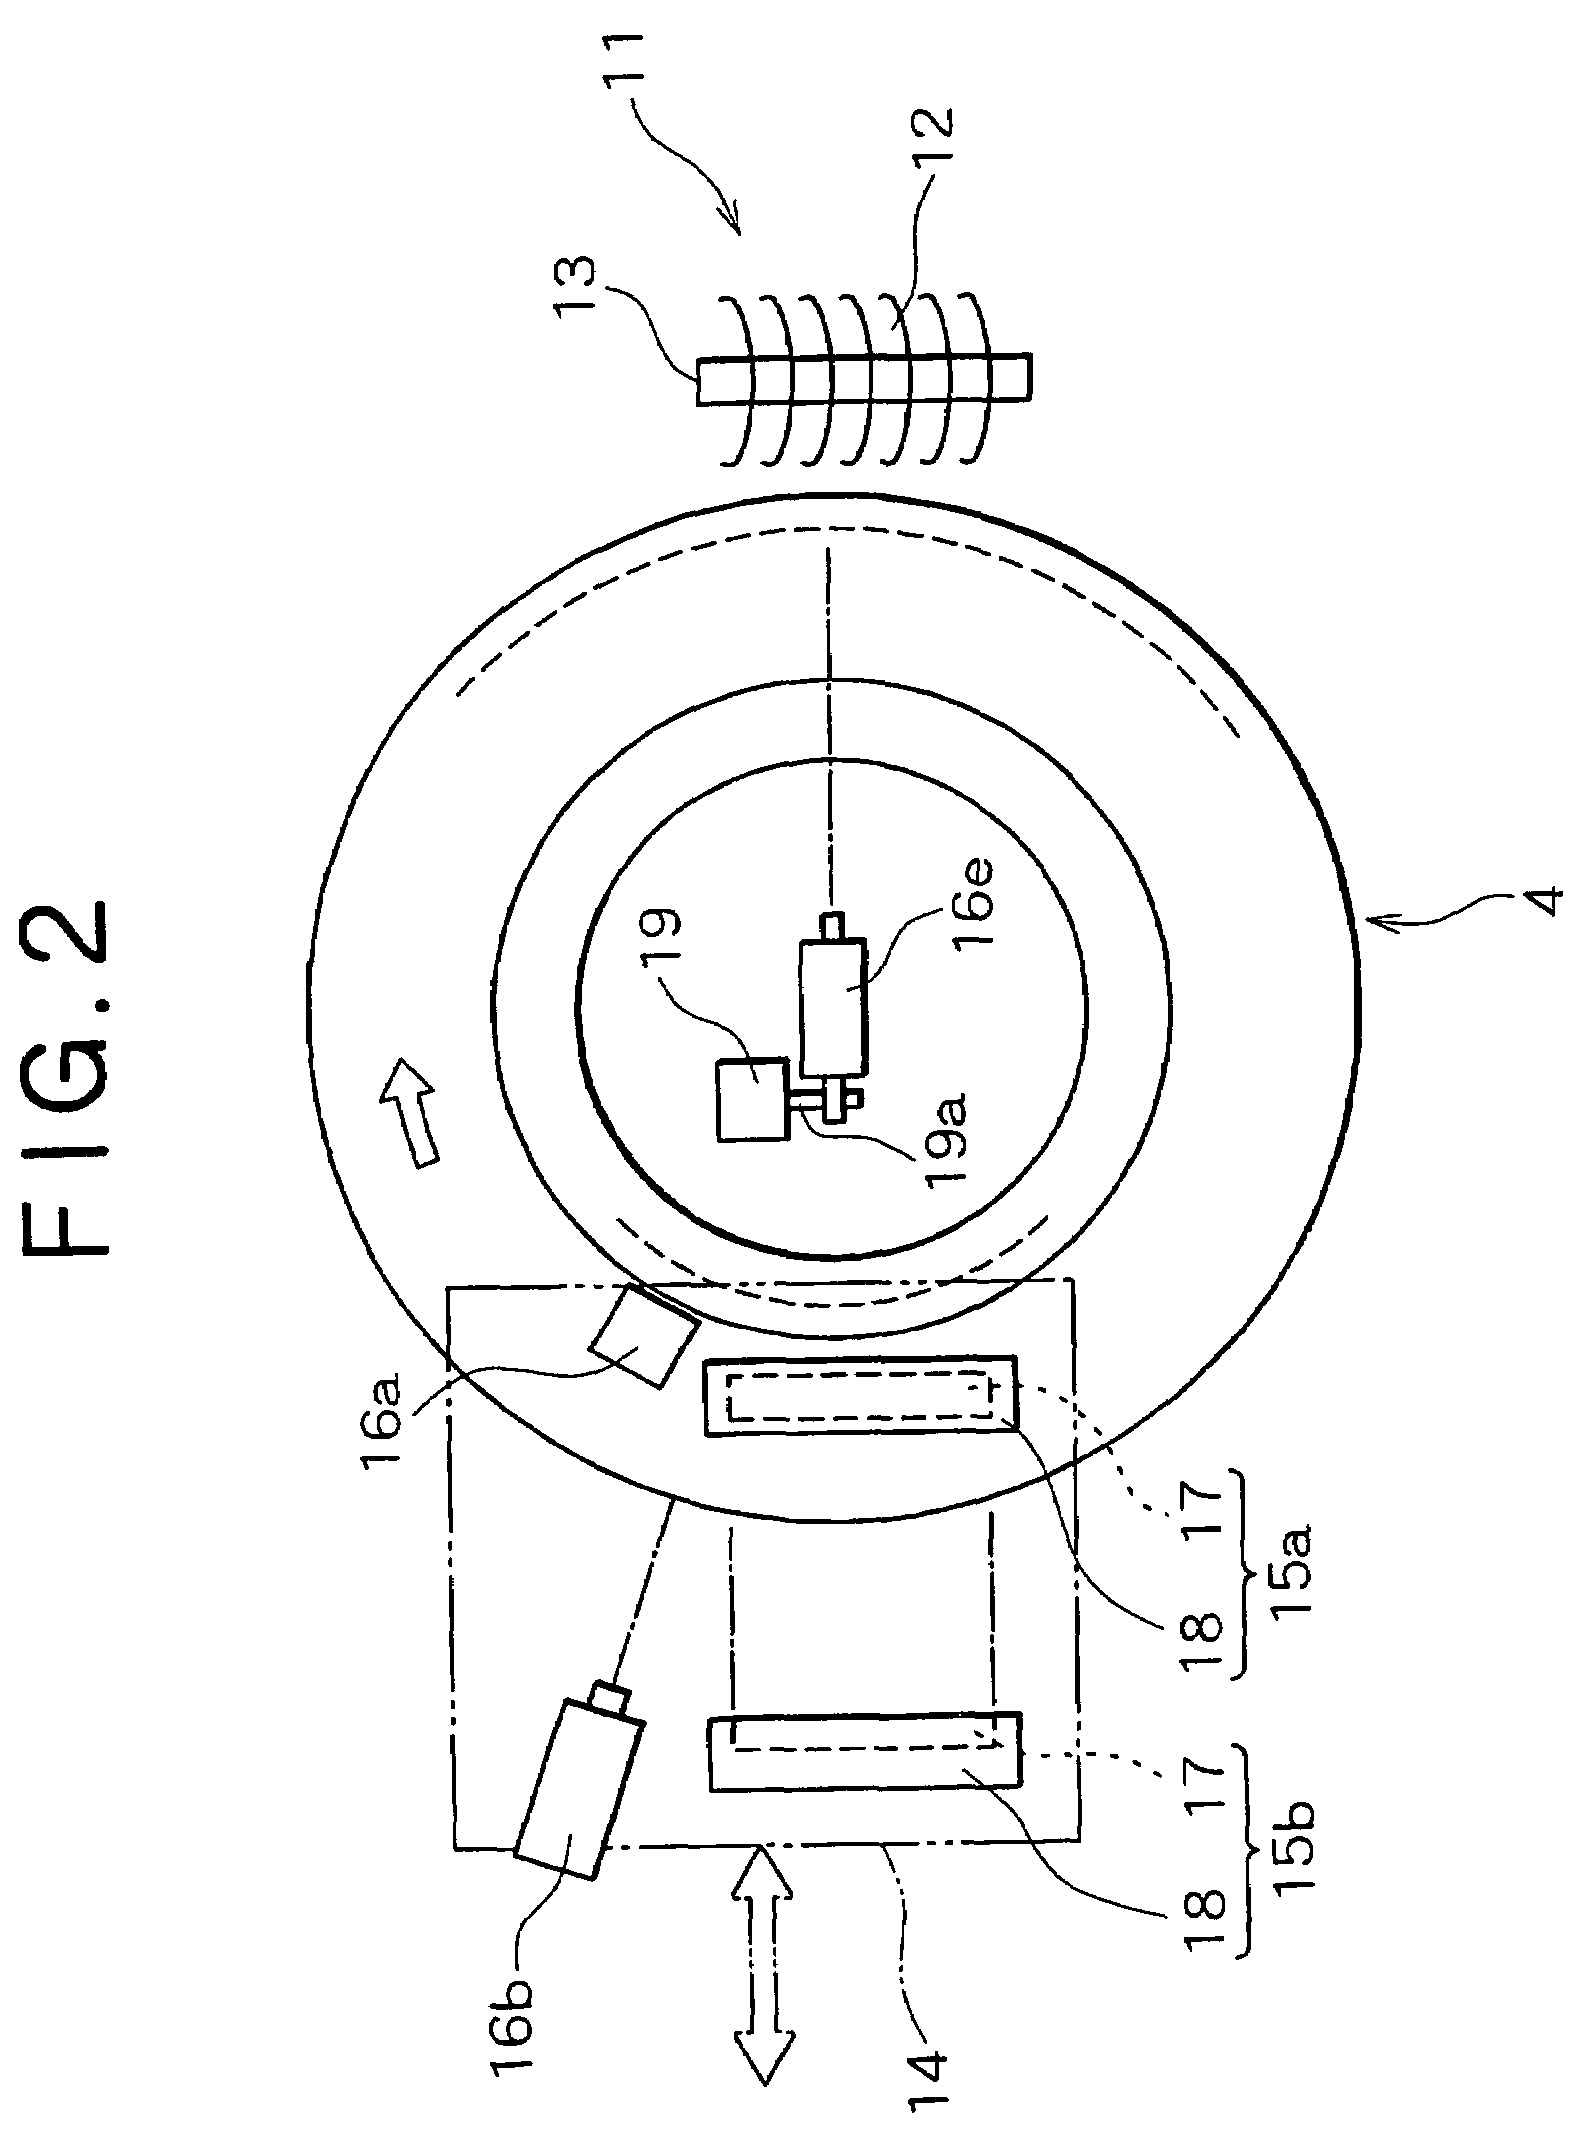 Method and apparatus for preheating raw tire